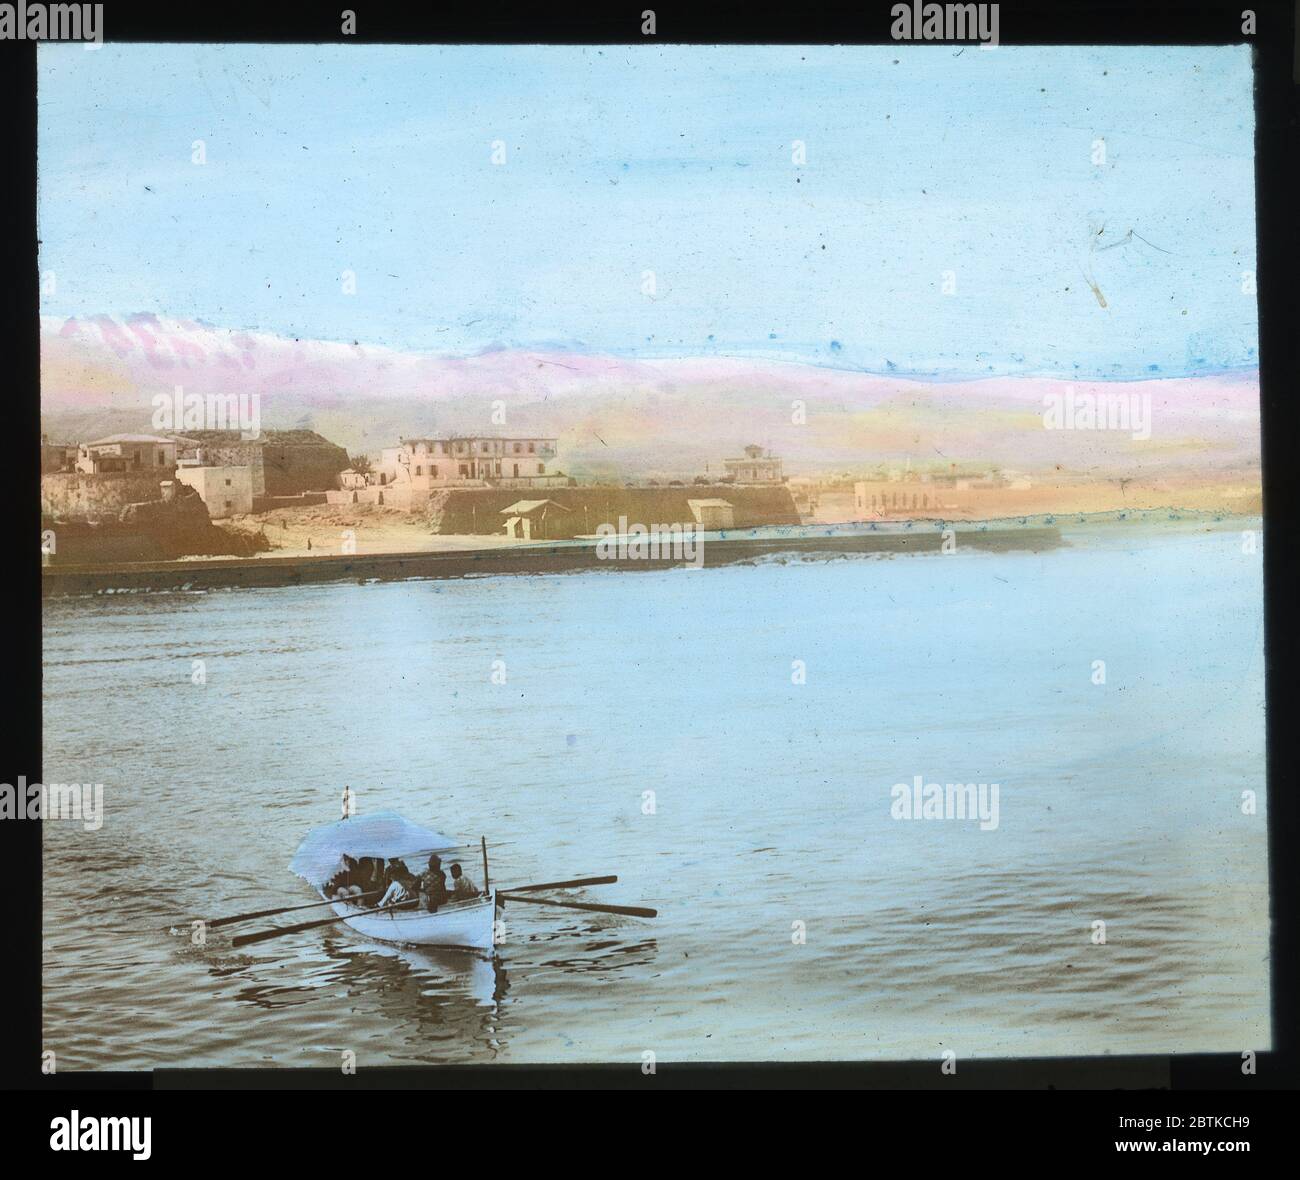 Panorama of Chania / Crete. Hand colored slide from around 1910. Photograph on dry glass plate from the Herry W. Schaefer collection. Stock Photo